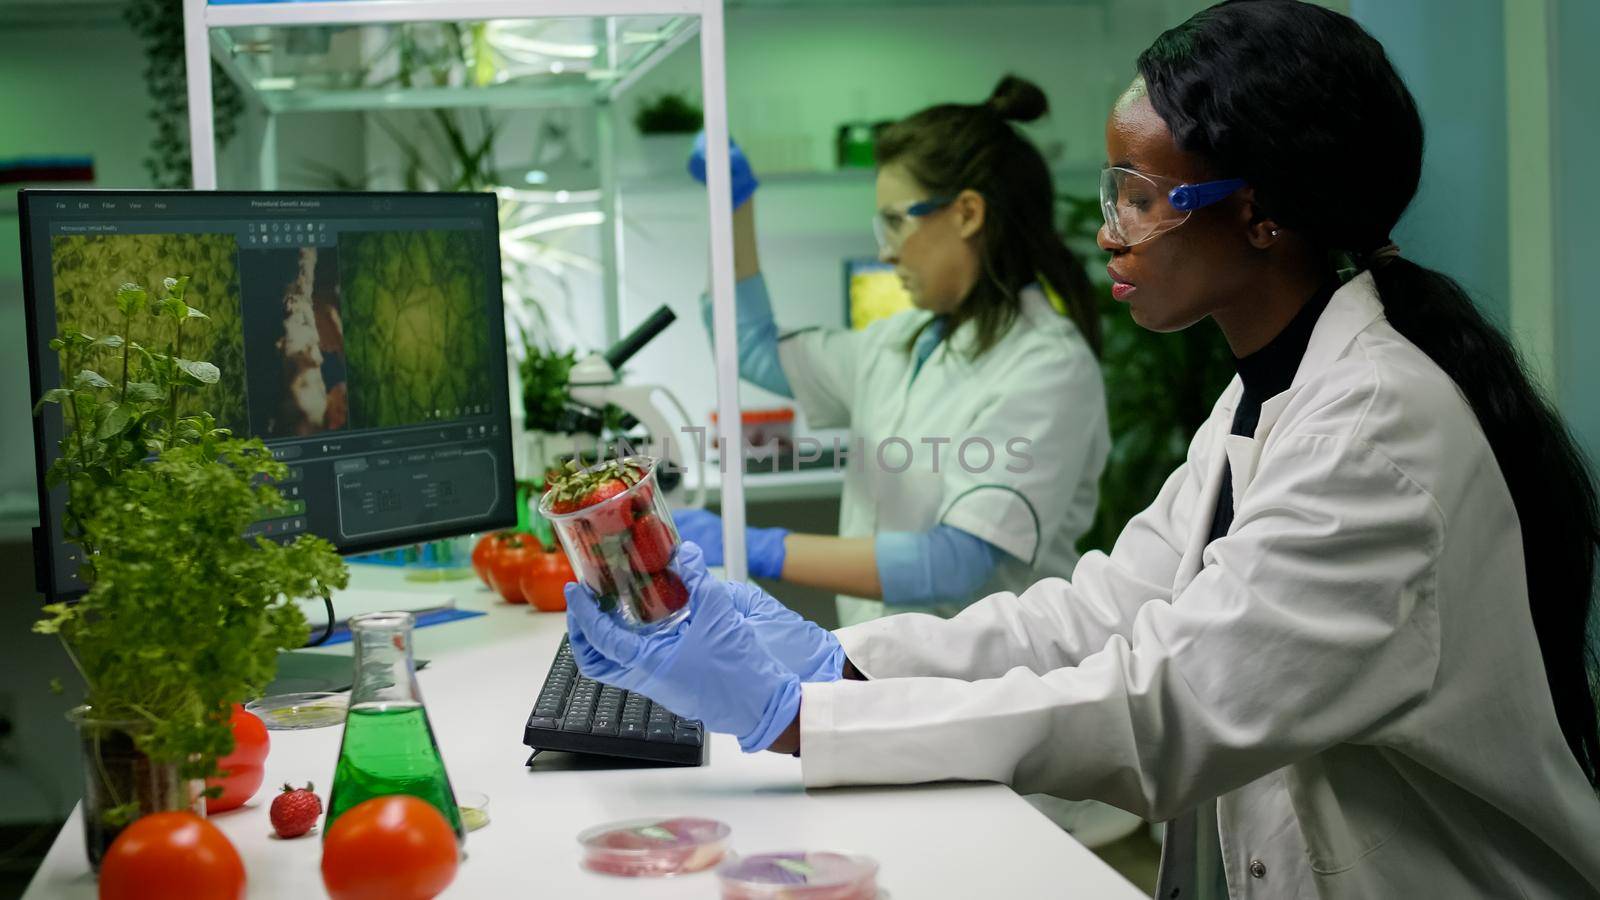 Pharmaceutical scientist looking at strawberry injecting with pesticides while typing biology expertise on computer. Medical team working in pharmaceutical laboratory examining gmo